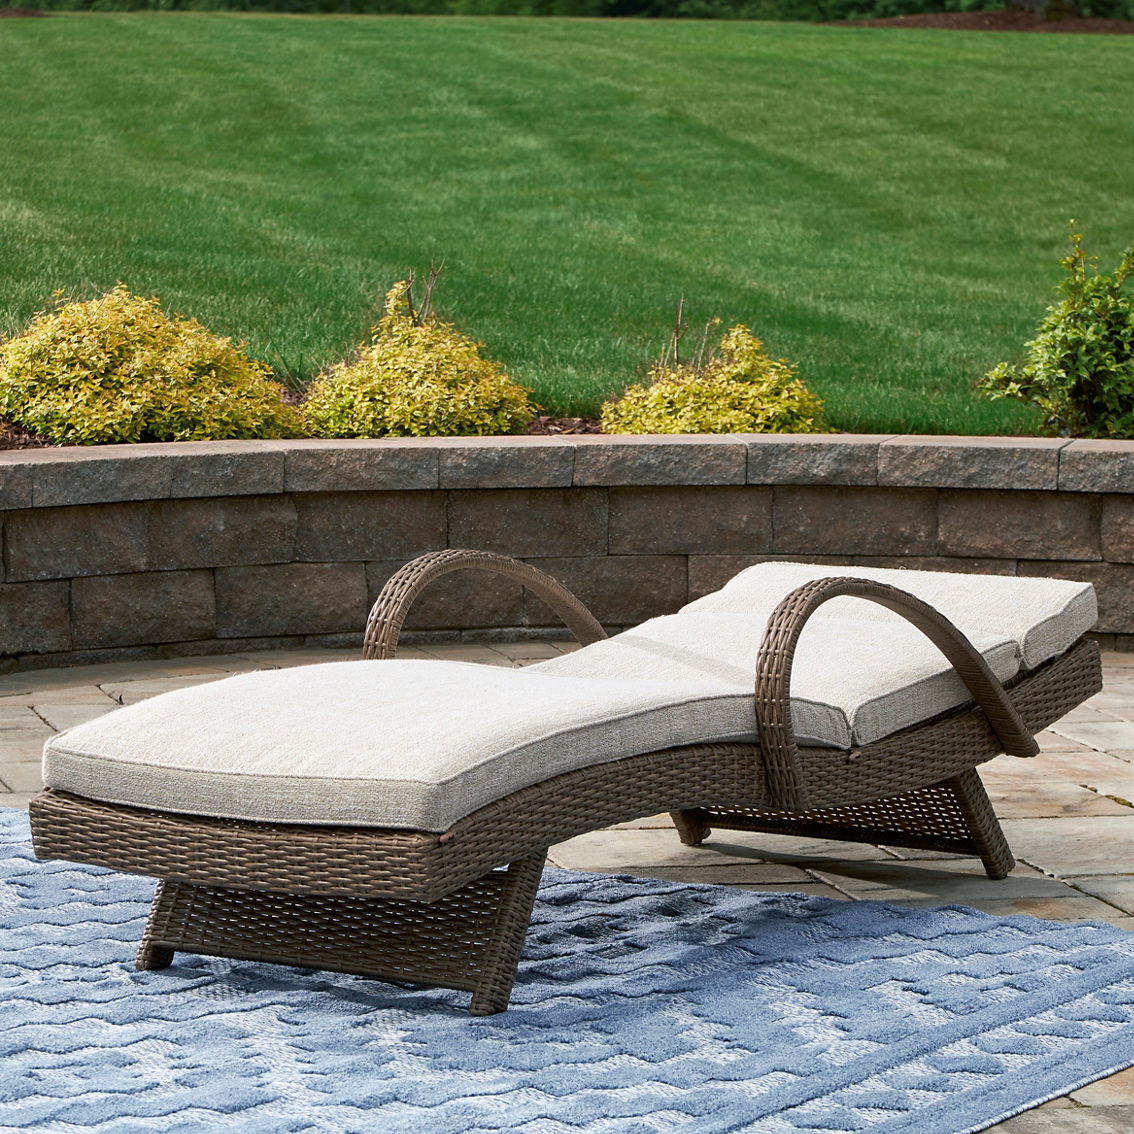 Signature Design by Ashley Beachcroft Outdoor Chaise Lounge with Cushion - Image 3 of 4